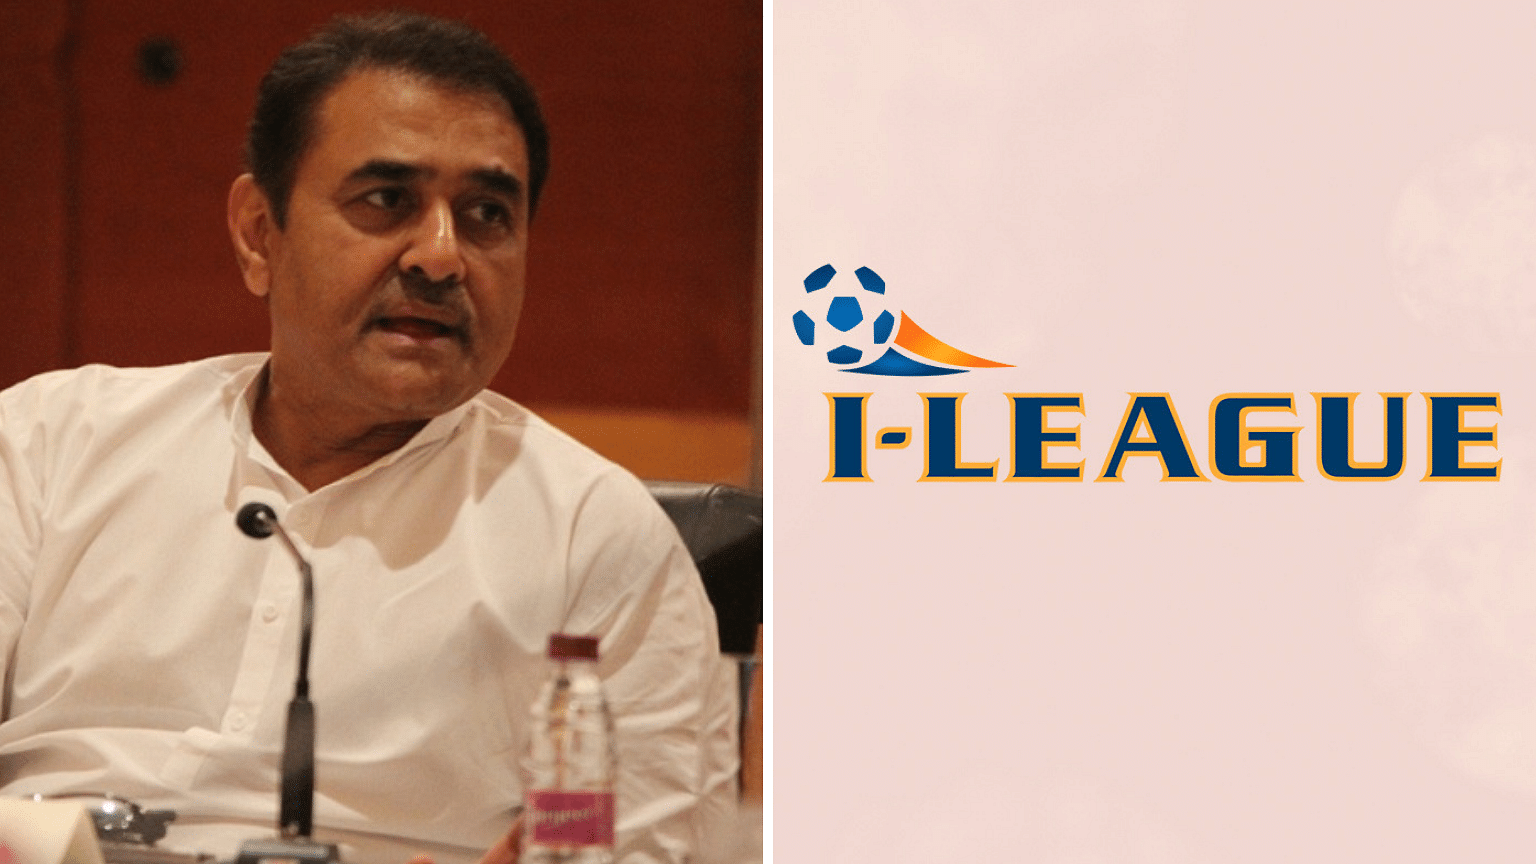 Before meeting AIFF President Praful Patel, the representatives of the I-League clubs will have a separate meeting among themselves.